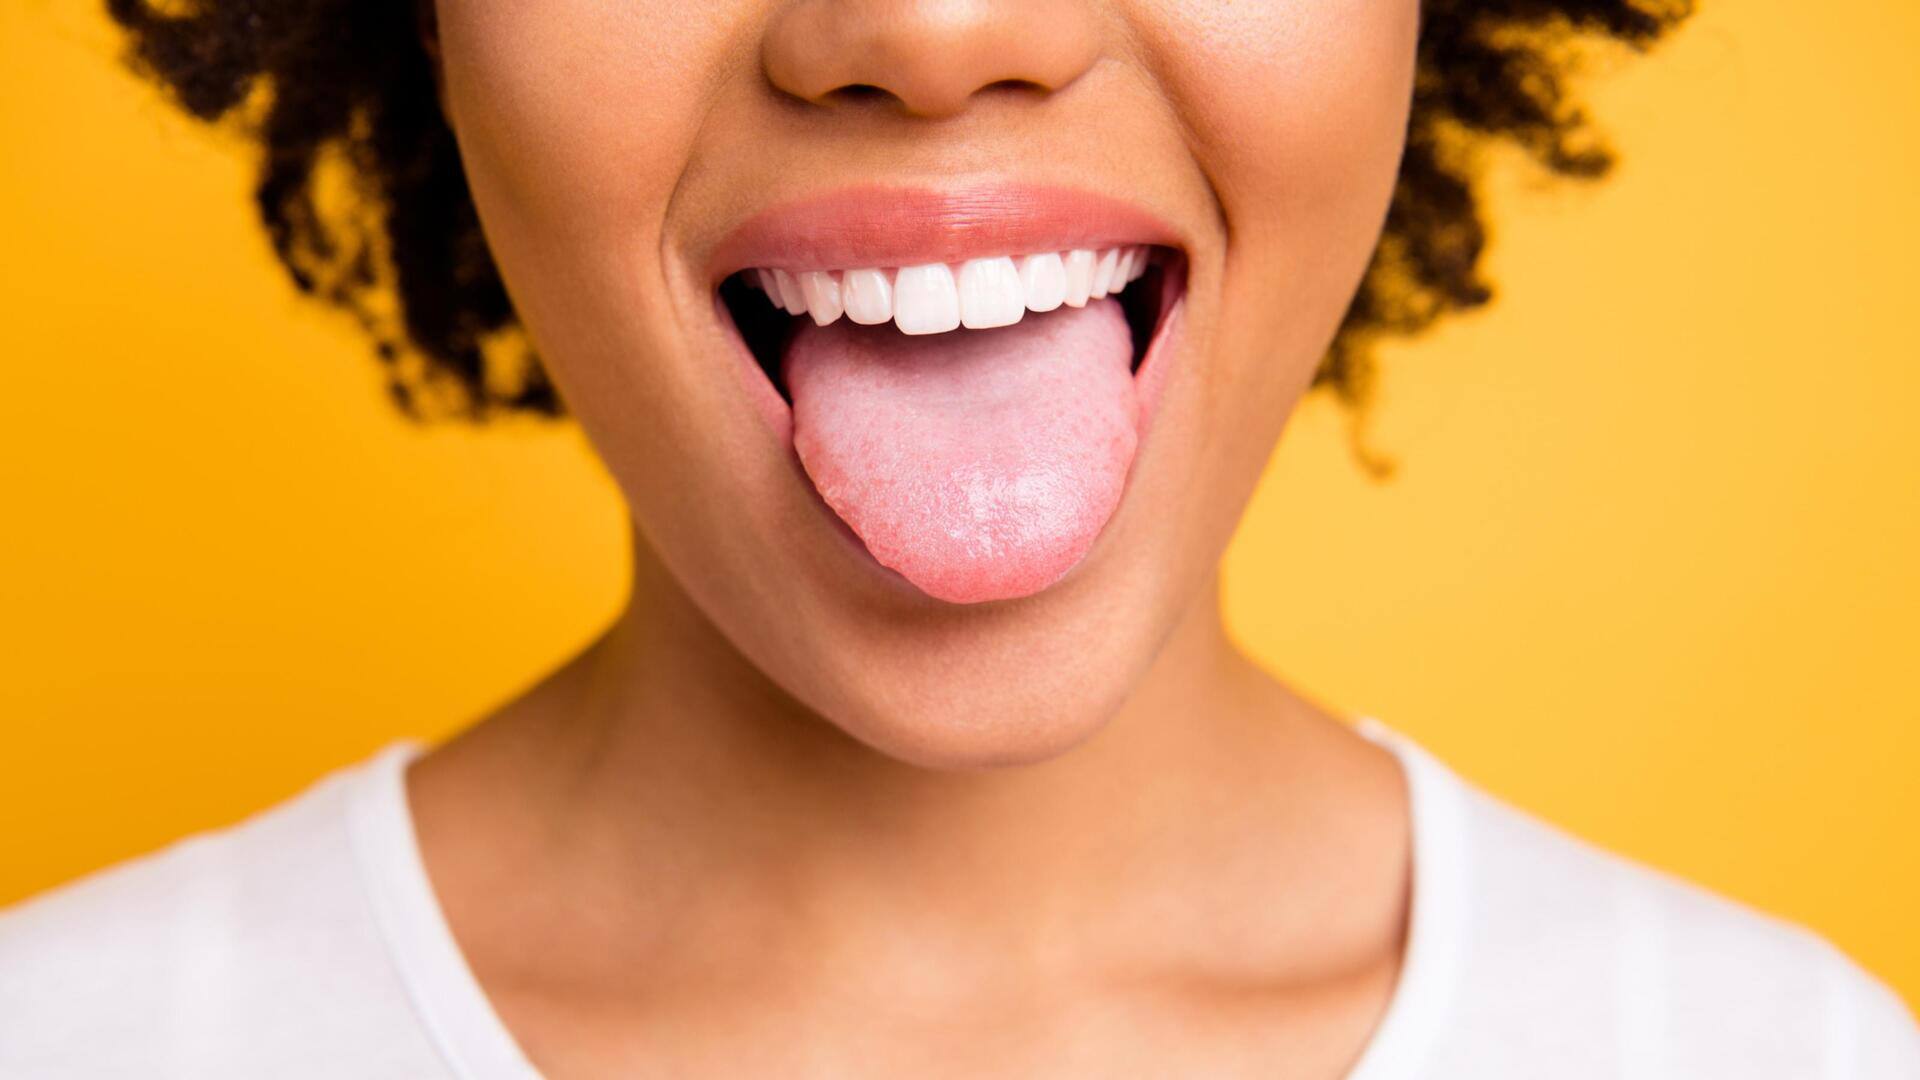 What your tongue says about your health